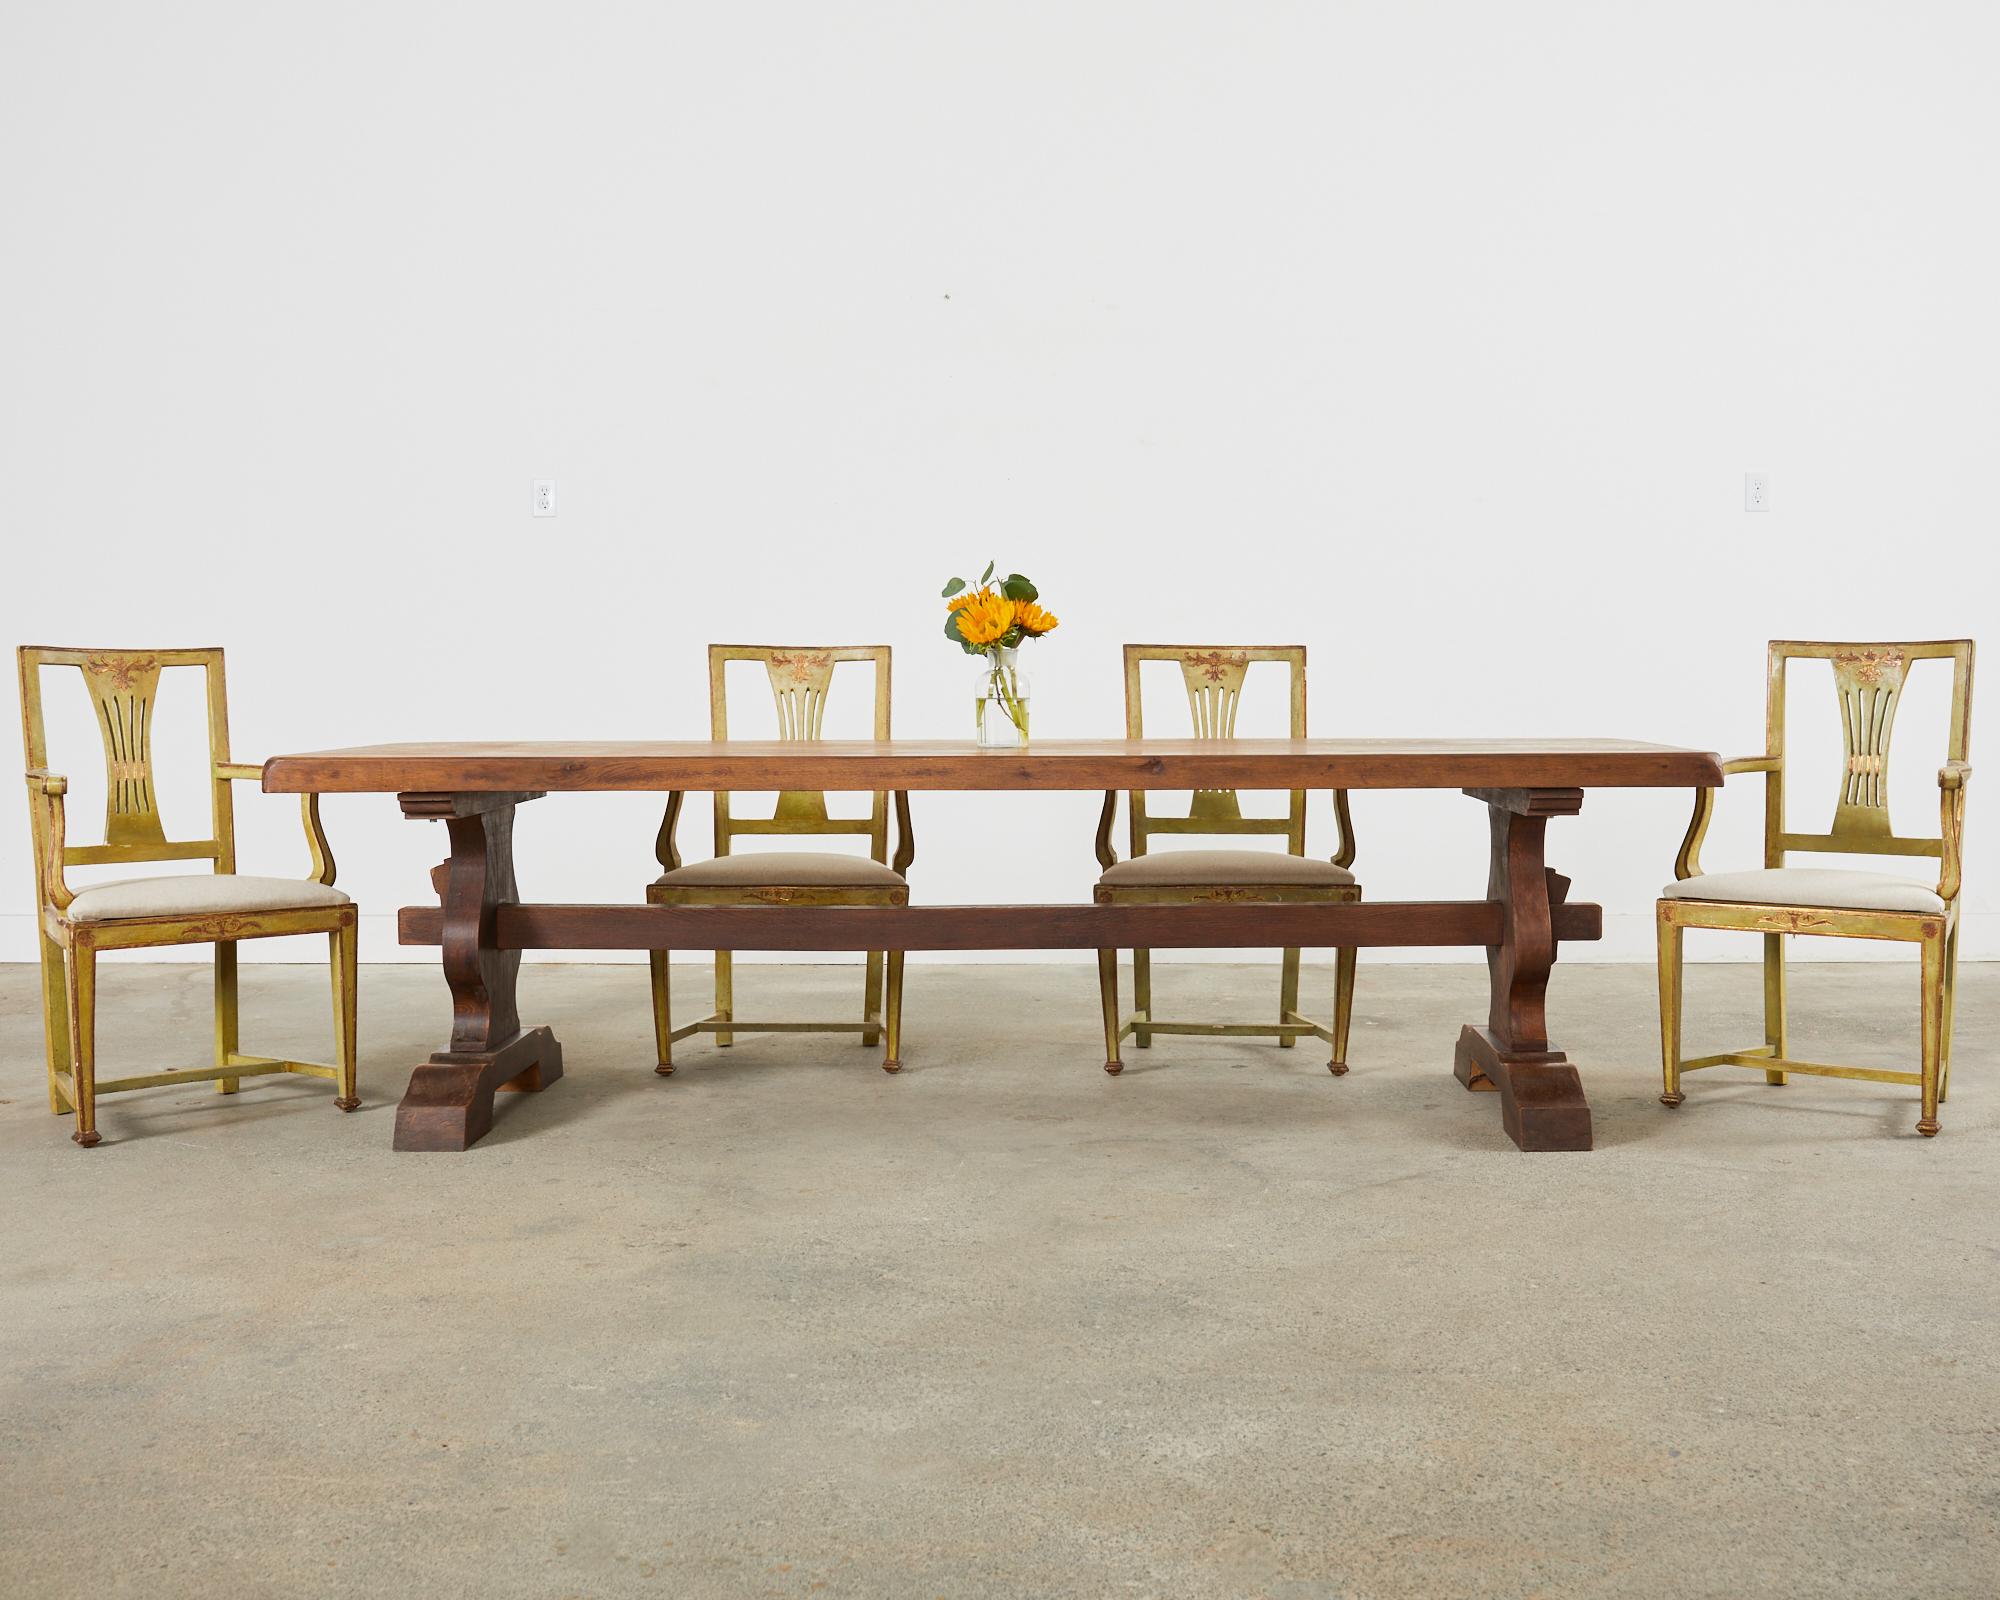 Large late 19th century country French provincial farmhouse dining table featuring a trestle style base. Crafted from oak the table top is made with 2.5 inch thick timber planks. The top is supported by hourglass shaped legs conjoined by a large